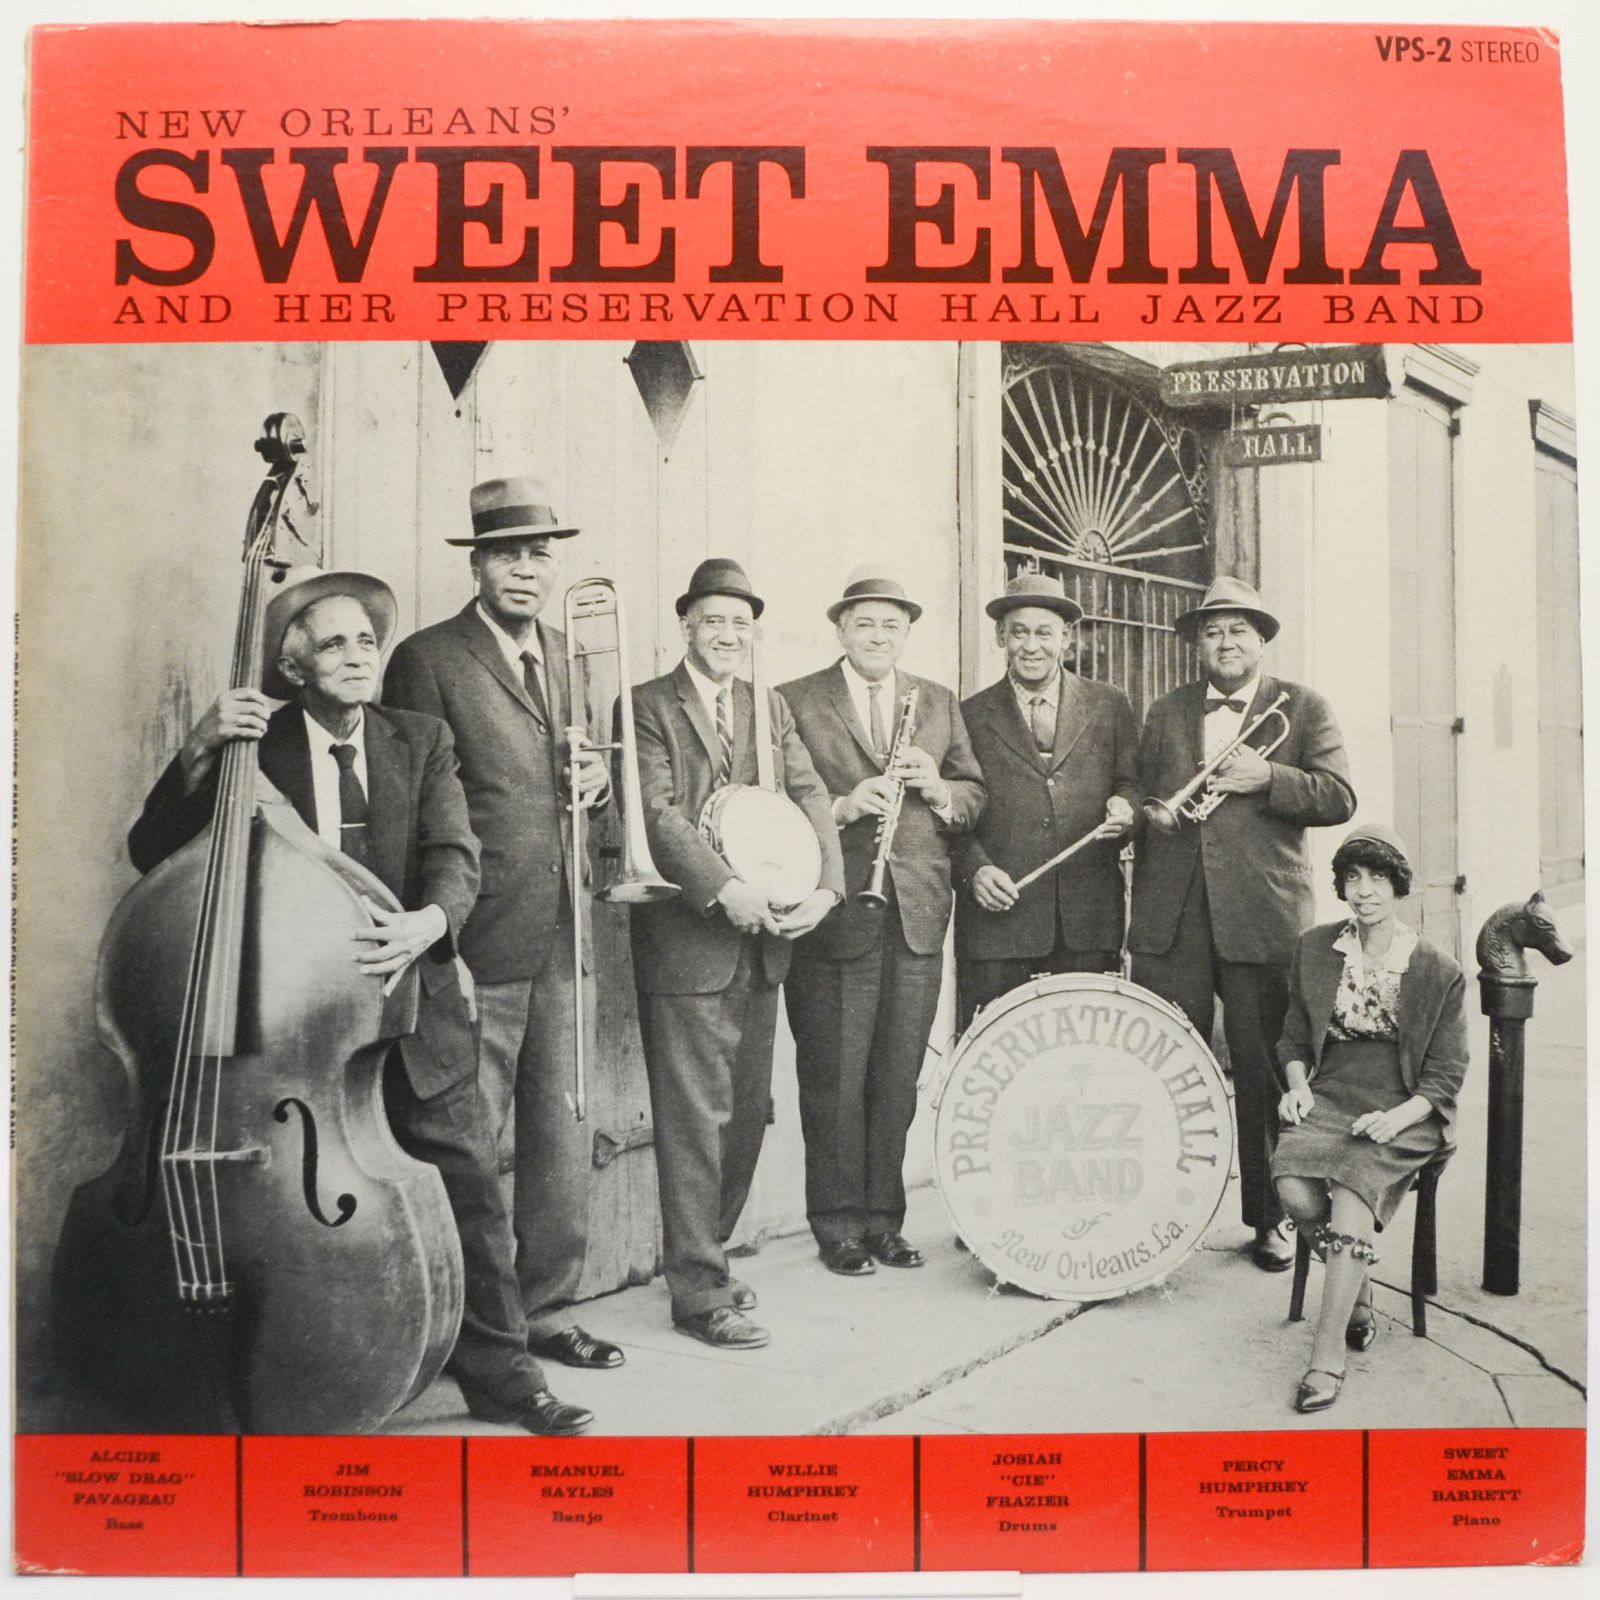 New Orleans' Sweet Emma And Her Preservation Hall Jazz Band (USA), 1964